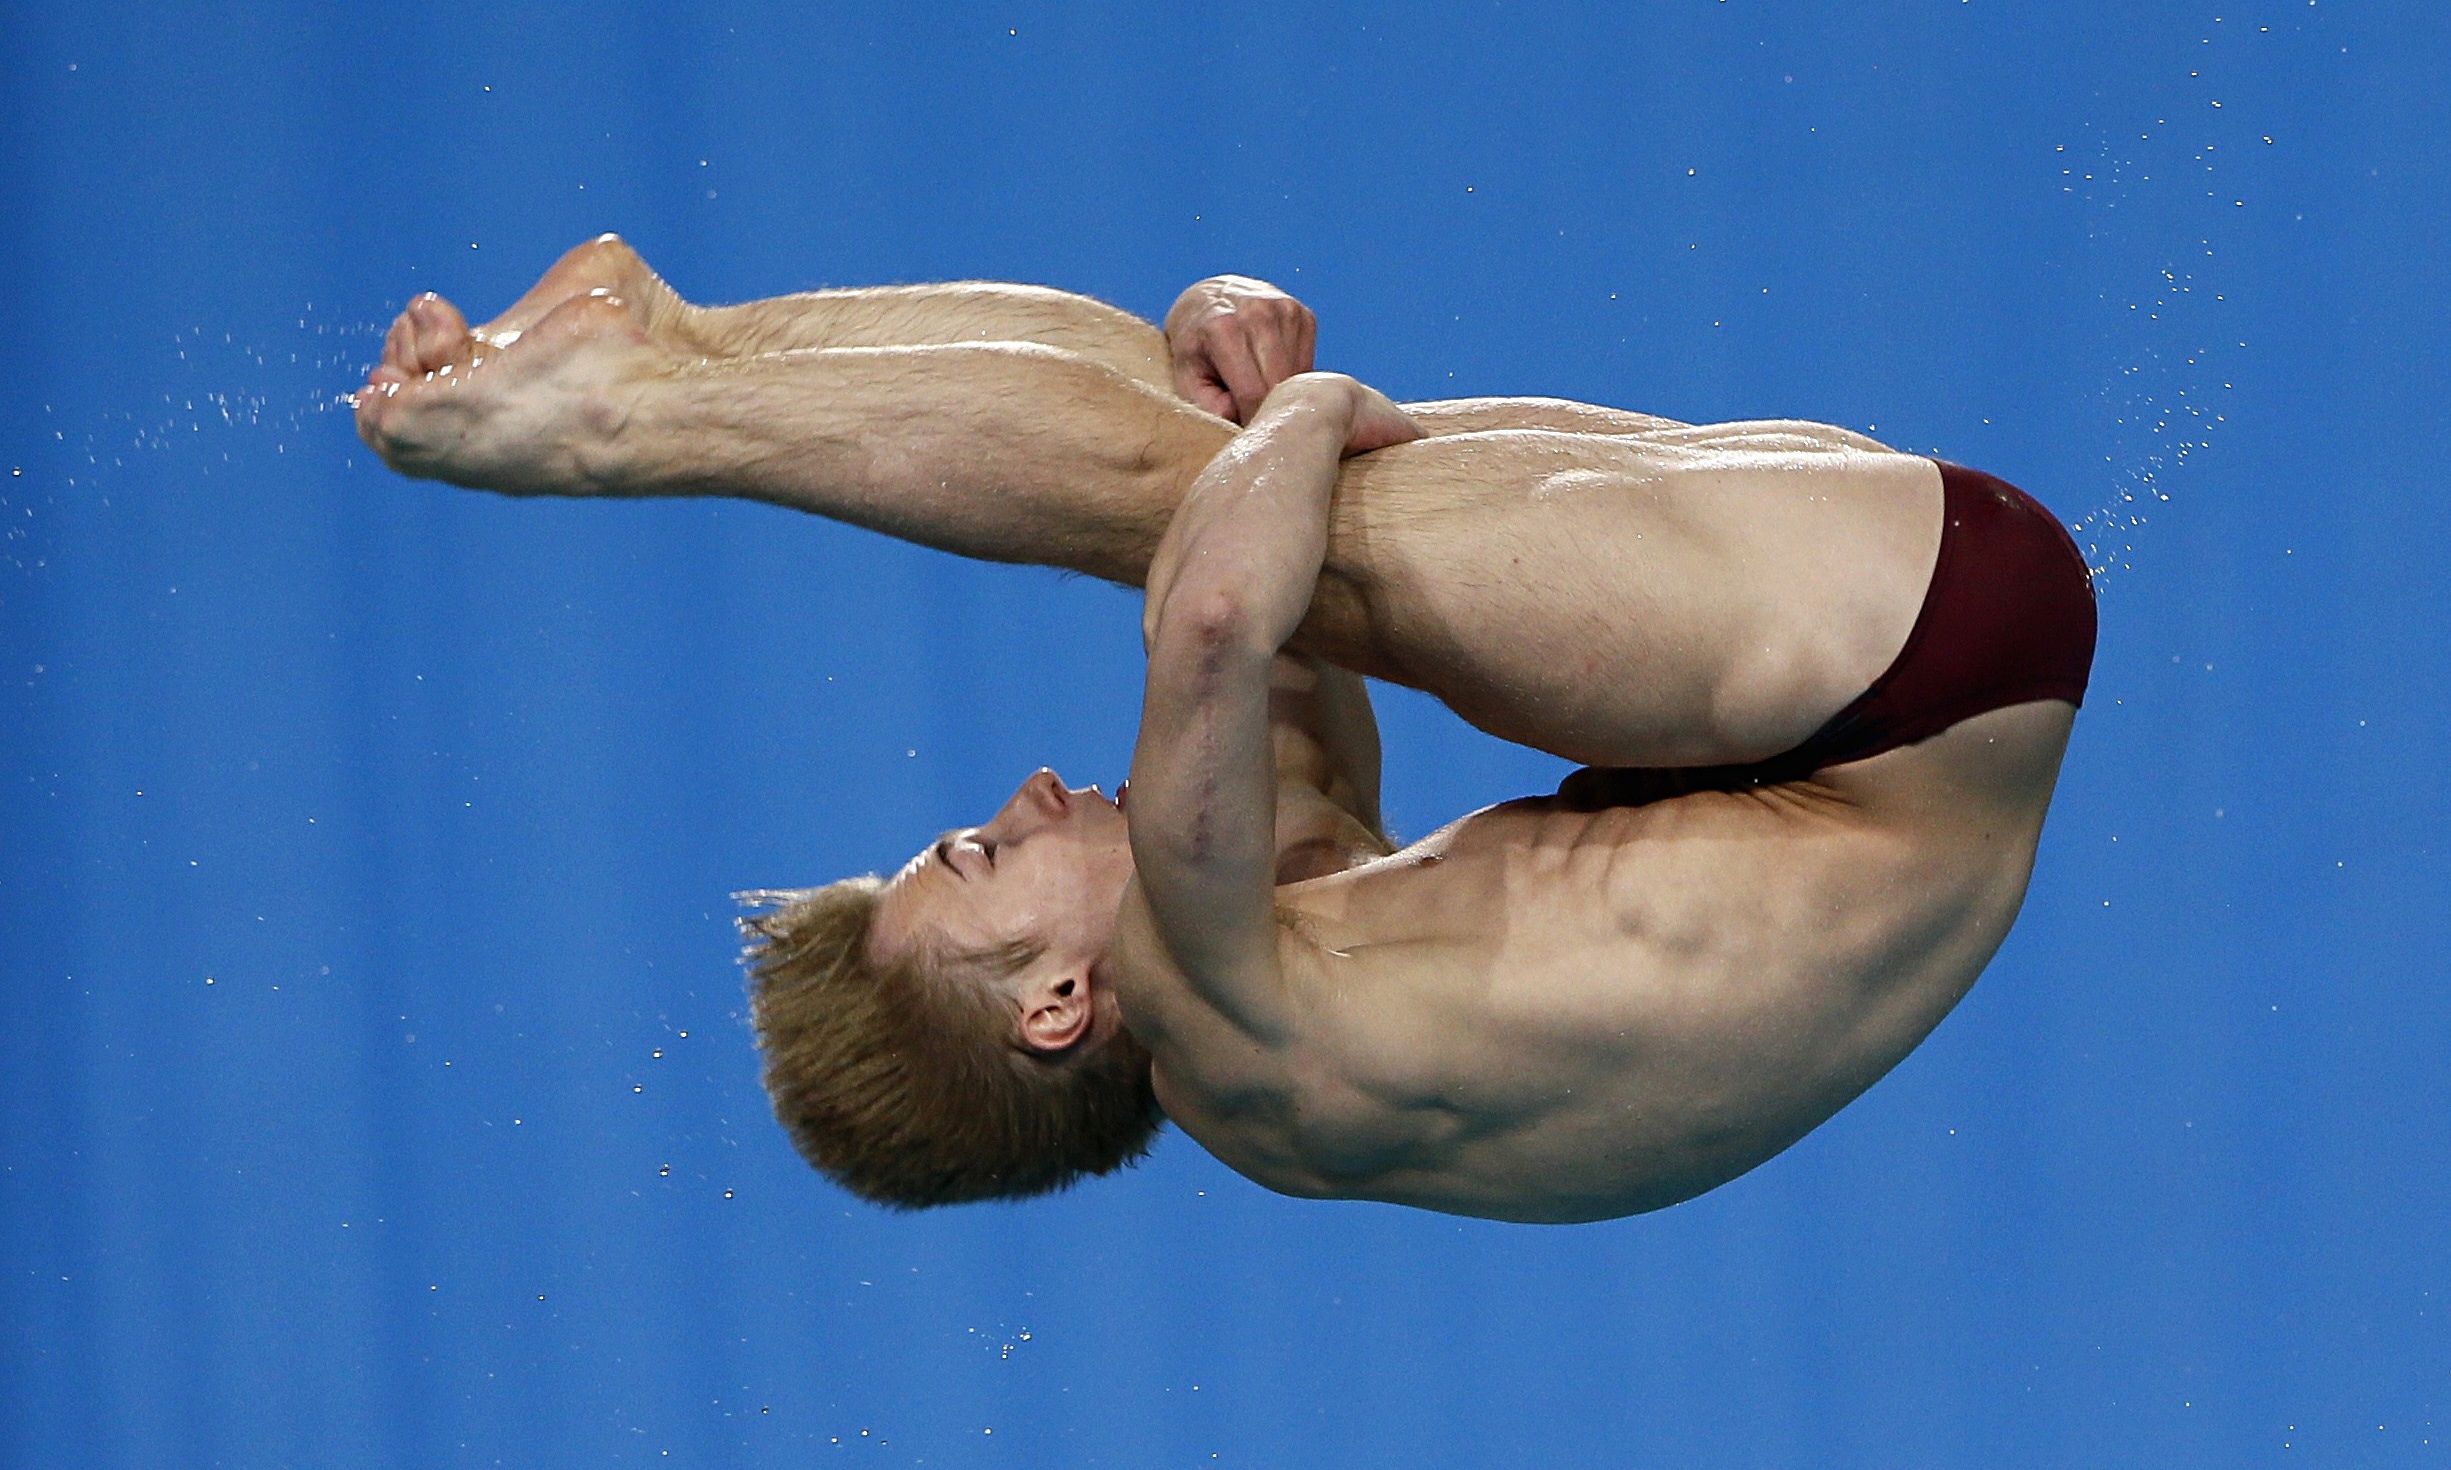 Commonwealth Games 2014 Englands Jack Laugher Wins Diving Gold